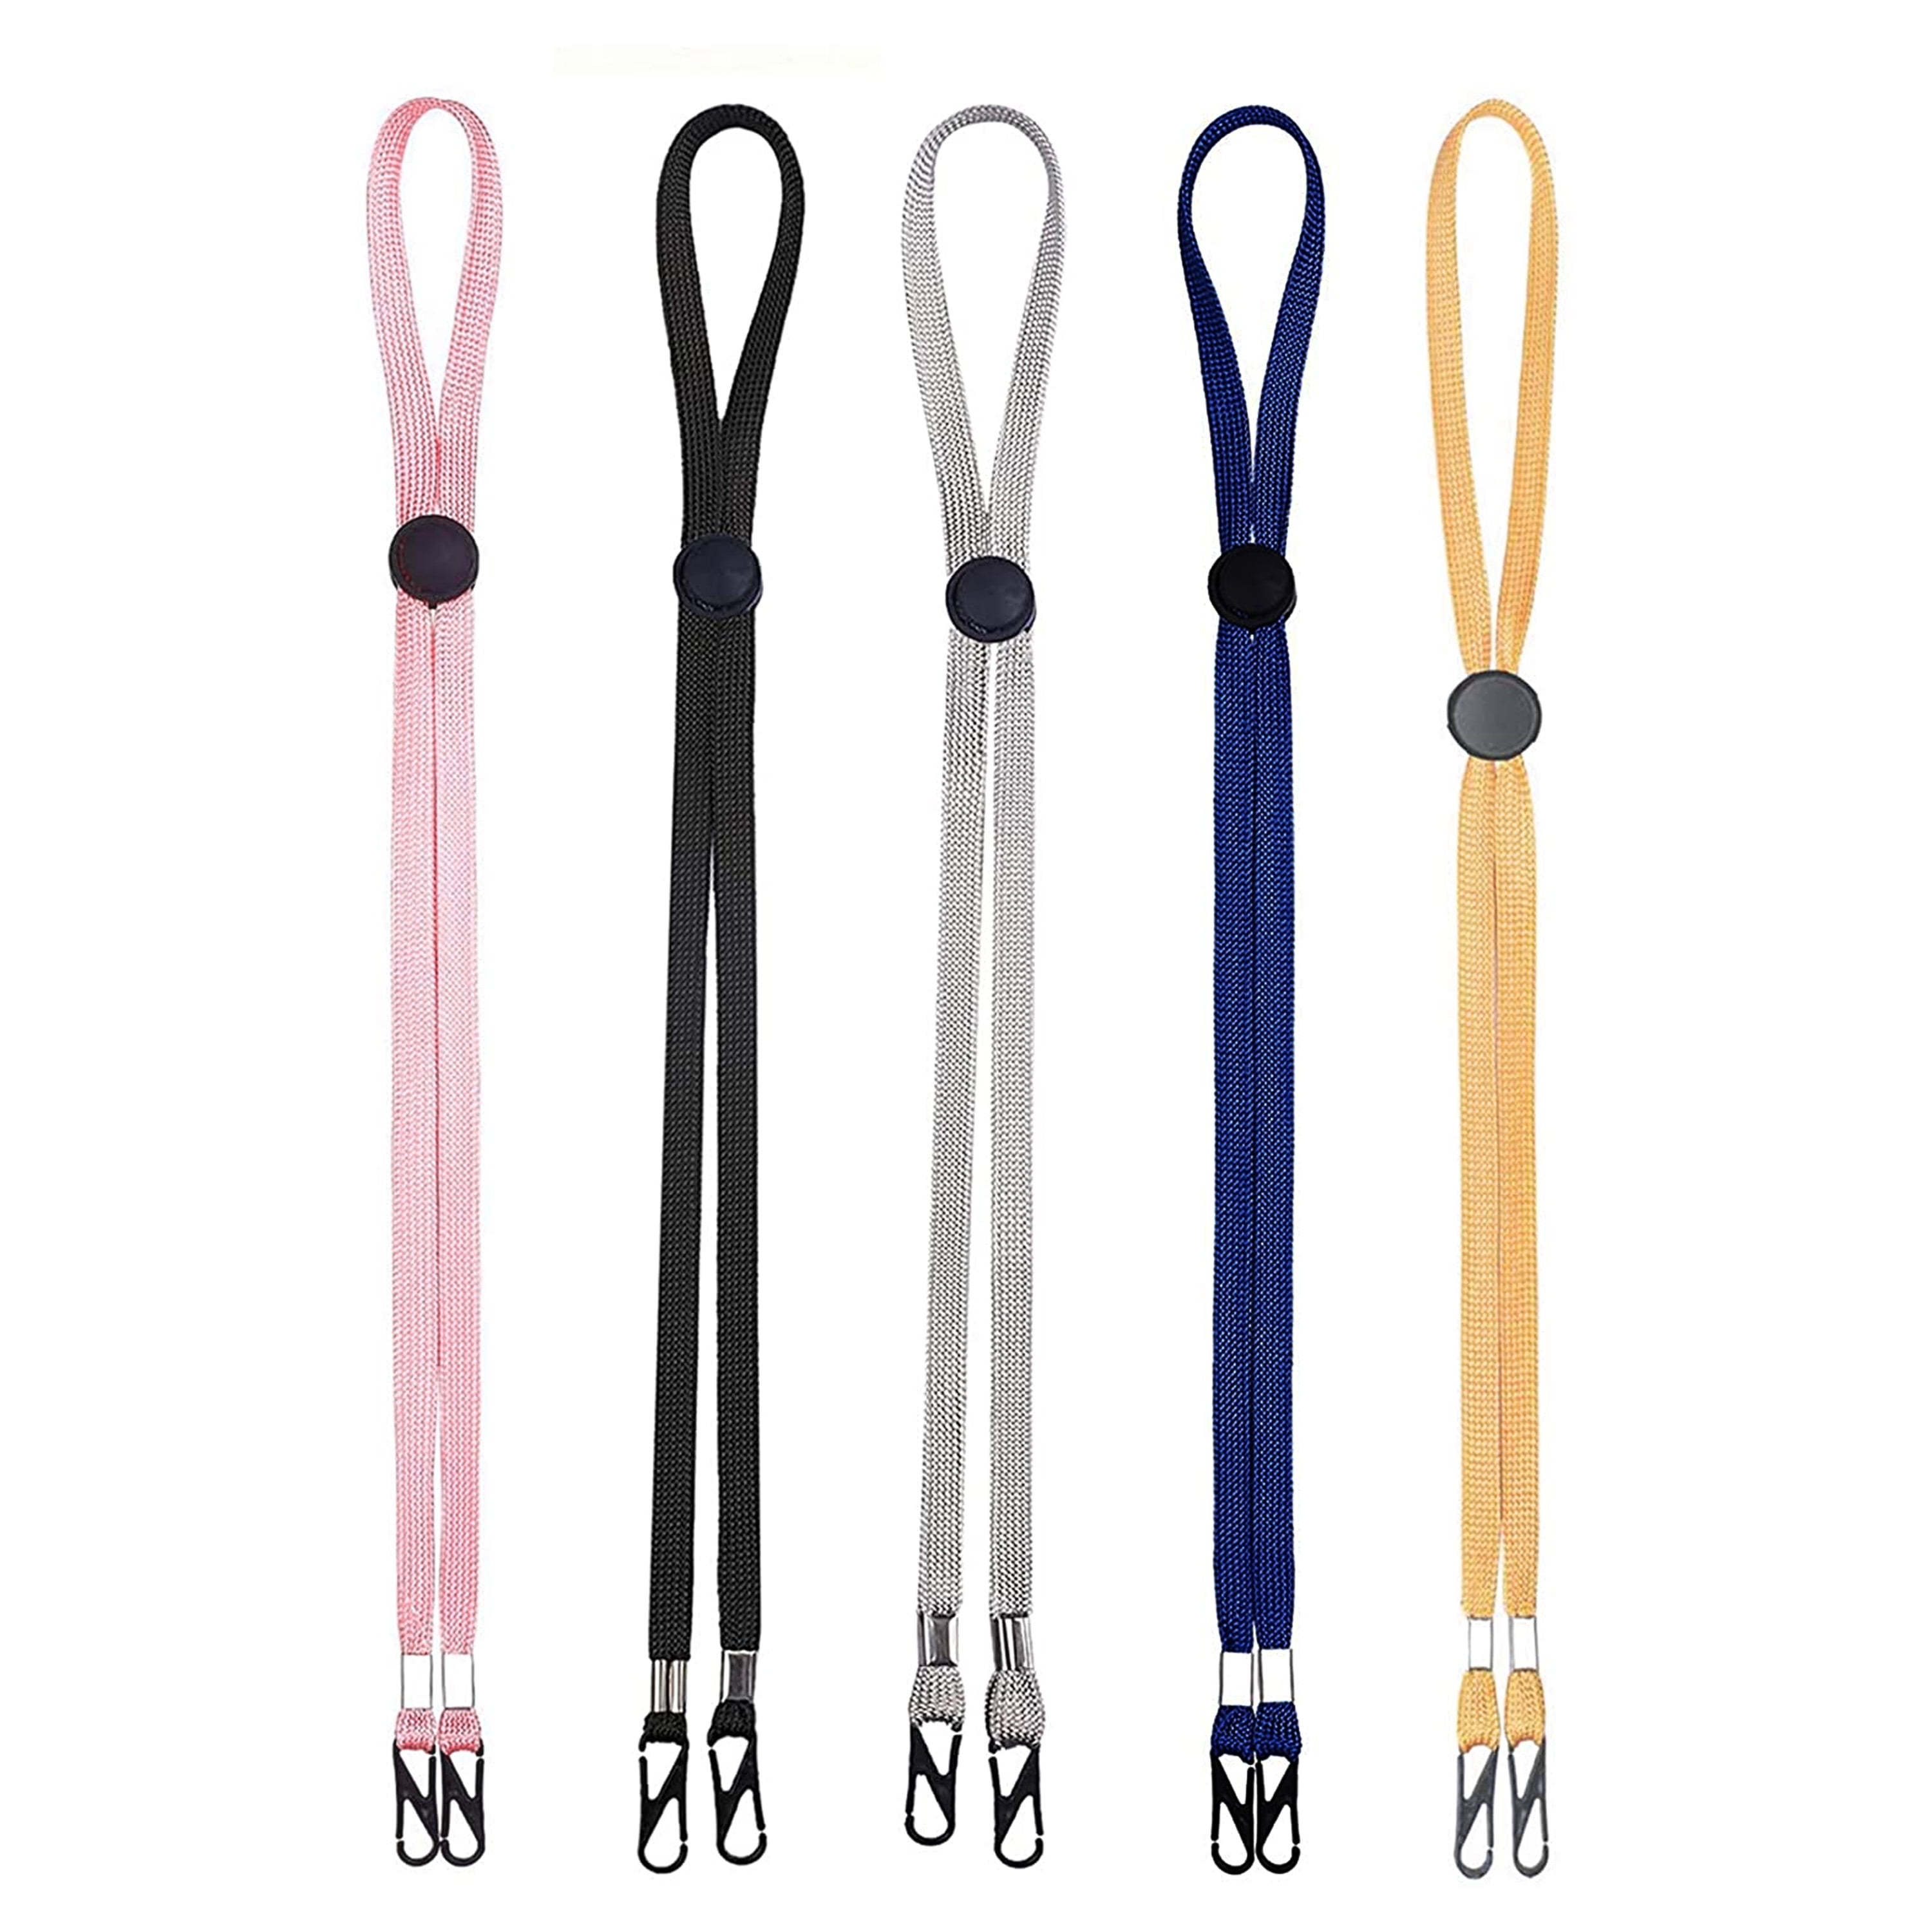 Adjustable Length Ṁɑşḱ Lanyard Strap String Cord Face Ṁɑşḱ Lanyard with Clips and Buckle Comfortable Around The Neck Handy&Convenient Eyeglass Chains for Kids Women Men